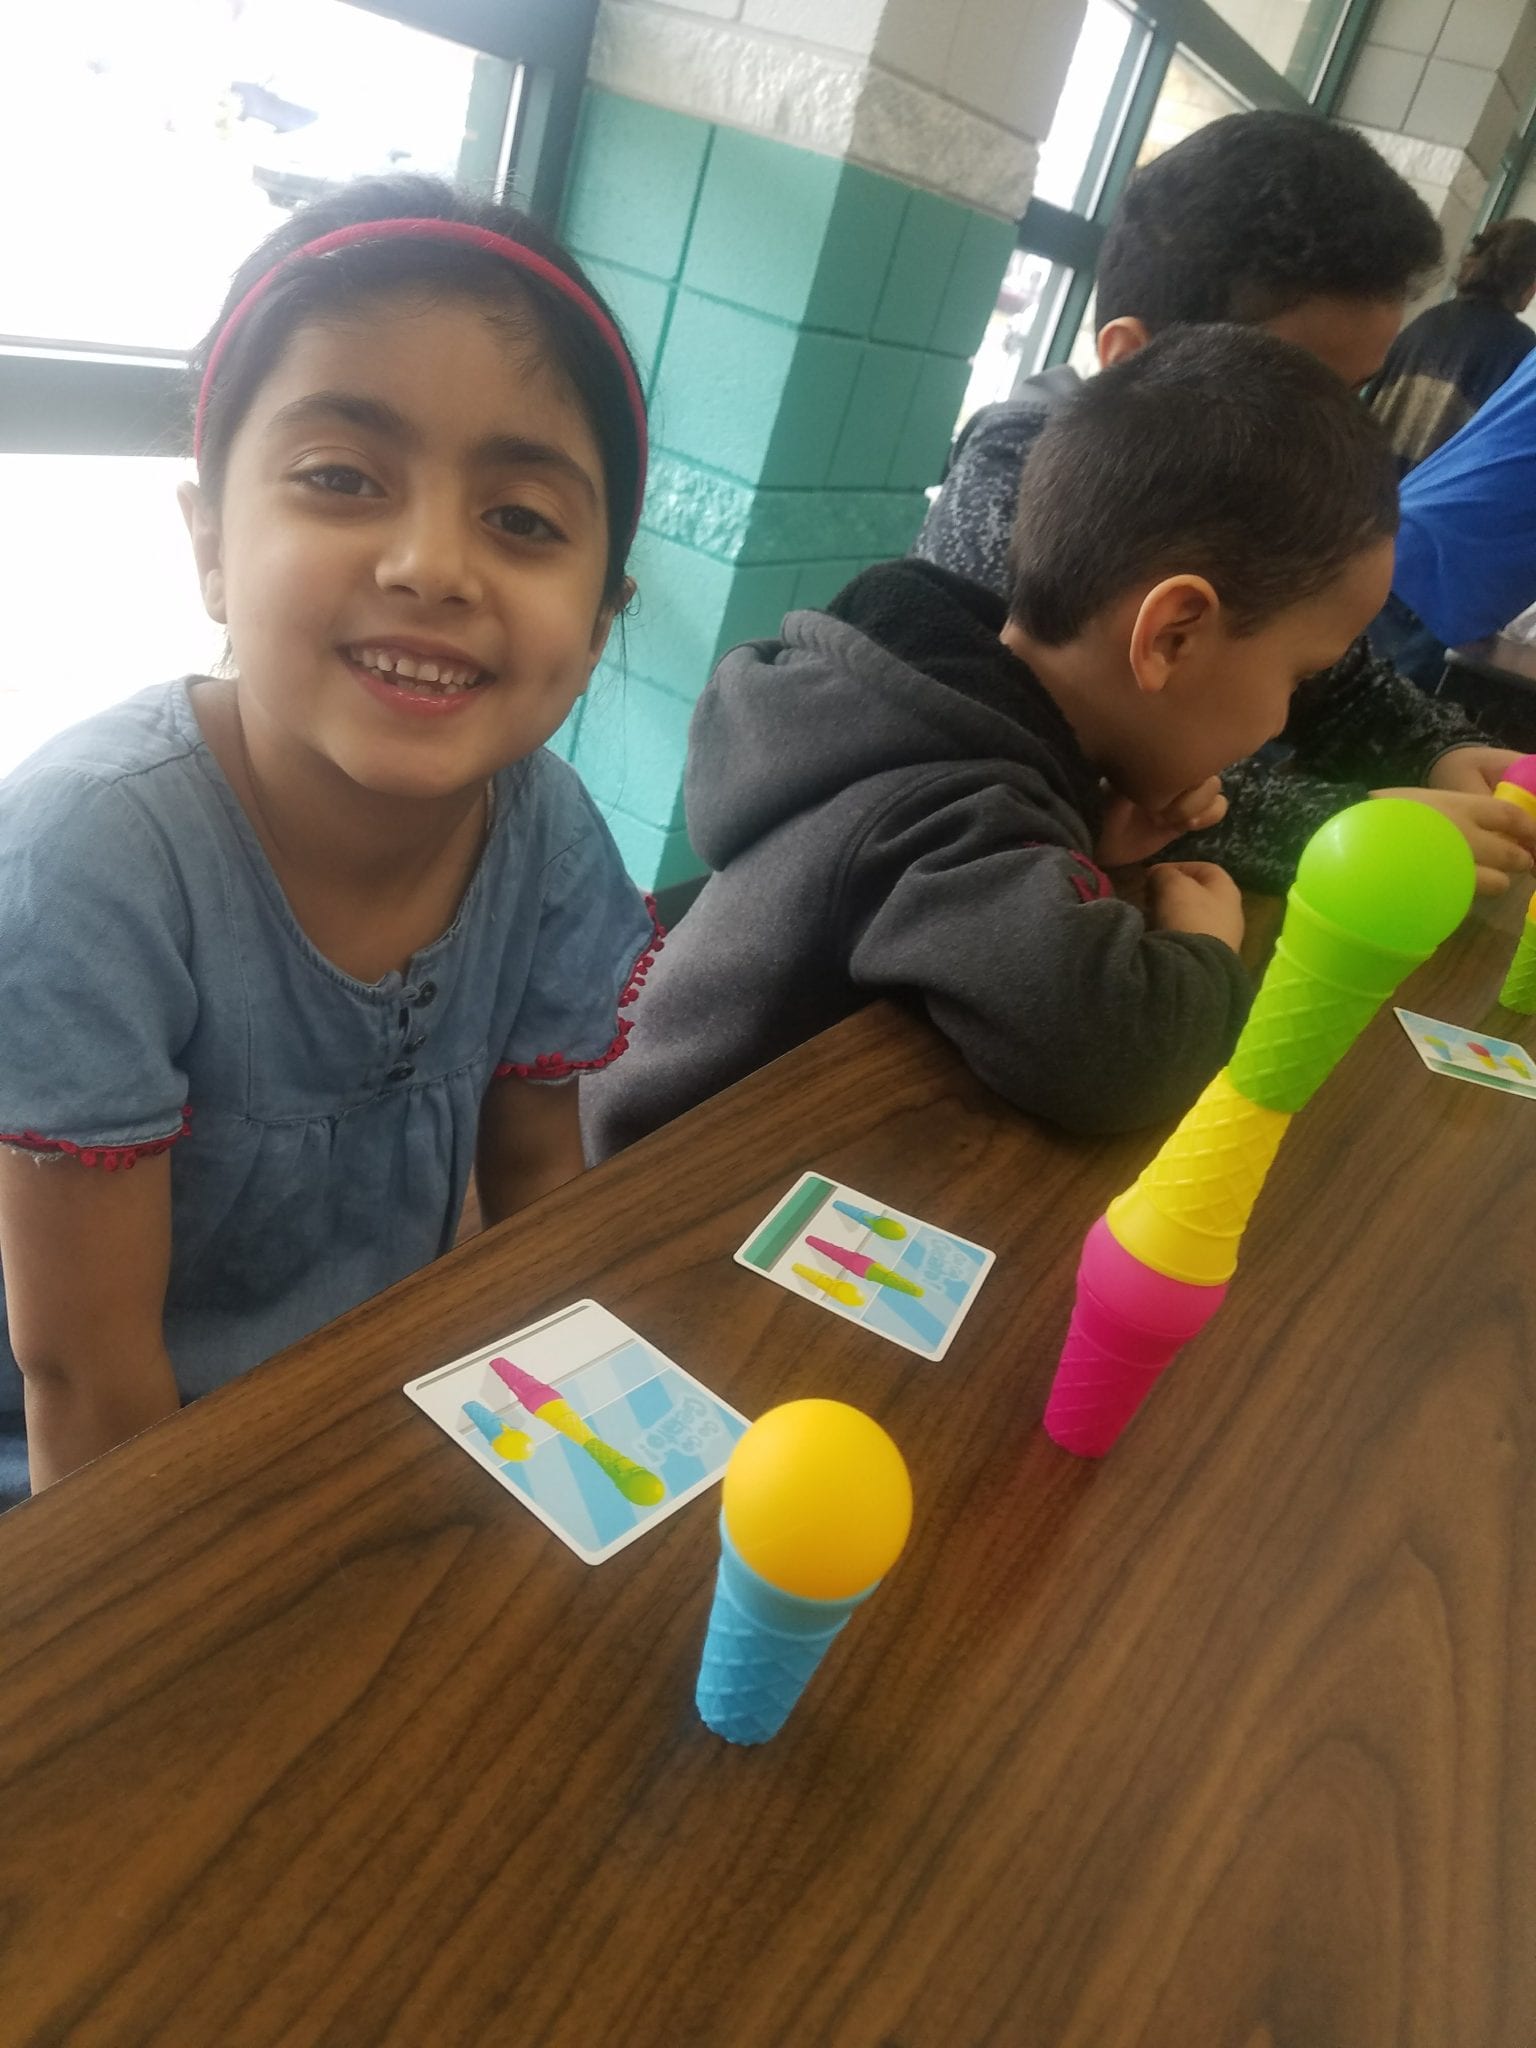 Student displaying her completed puzzle challenge using ice-cream scoops and cones